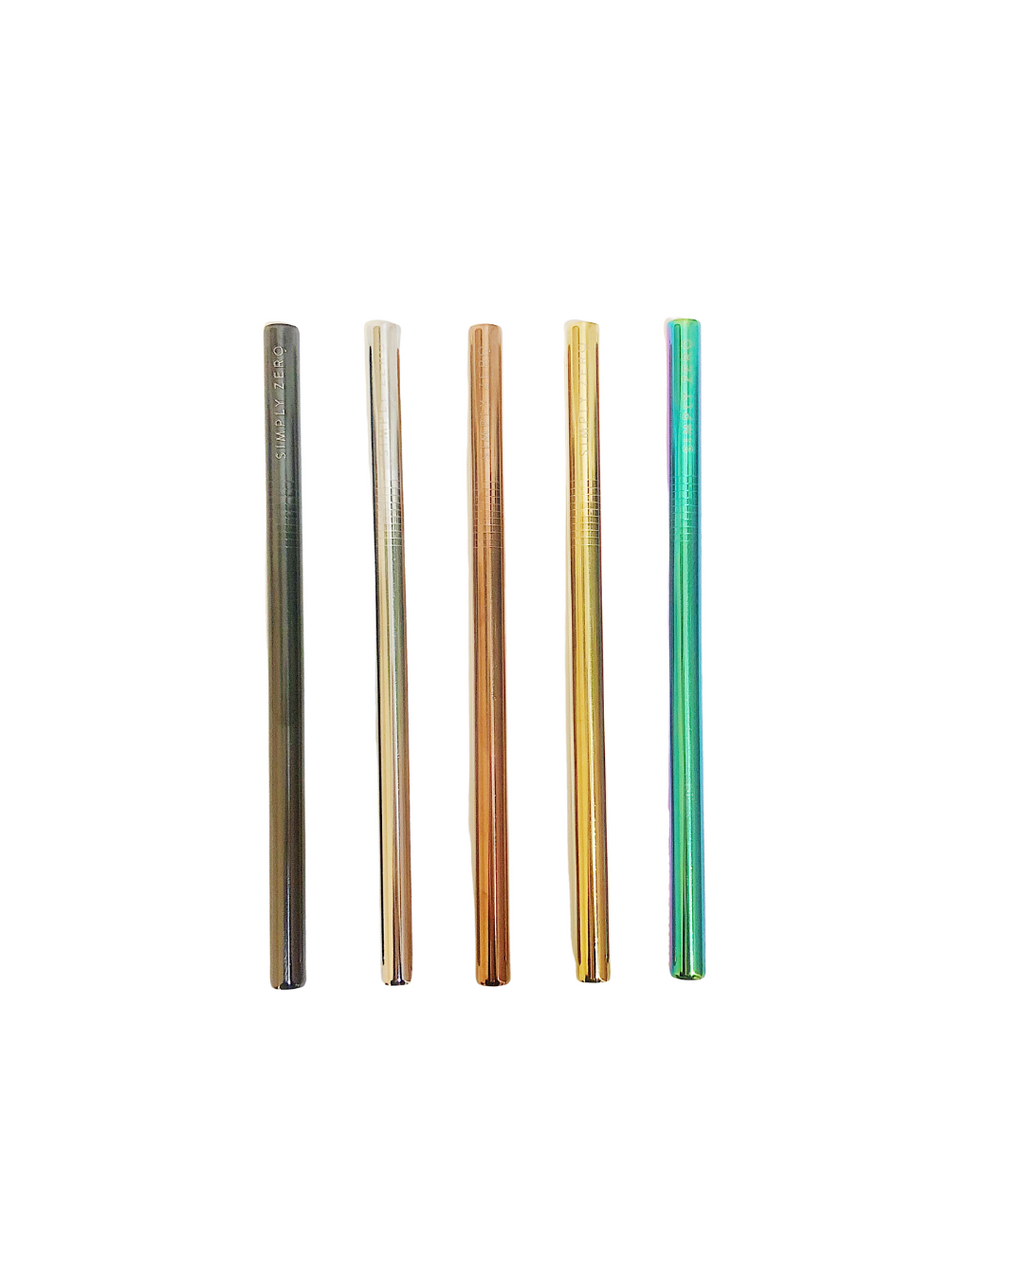 https://cdn.shopify.com/s/files/1/0247/3990/5599/products/SimplyZeroBoba_SmoothieStraw_1024x.png?v=1673990168